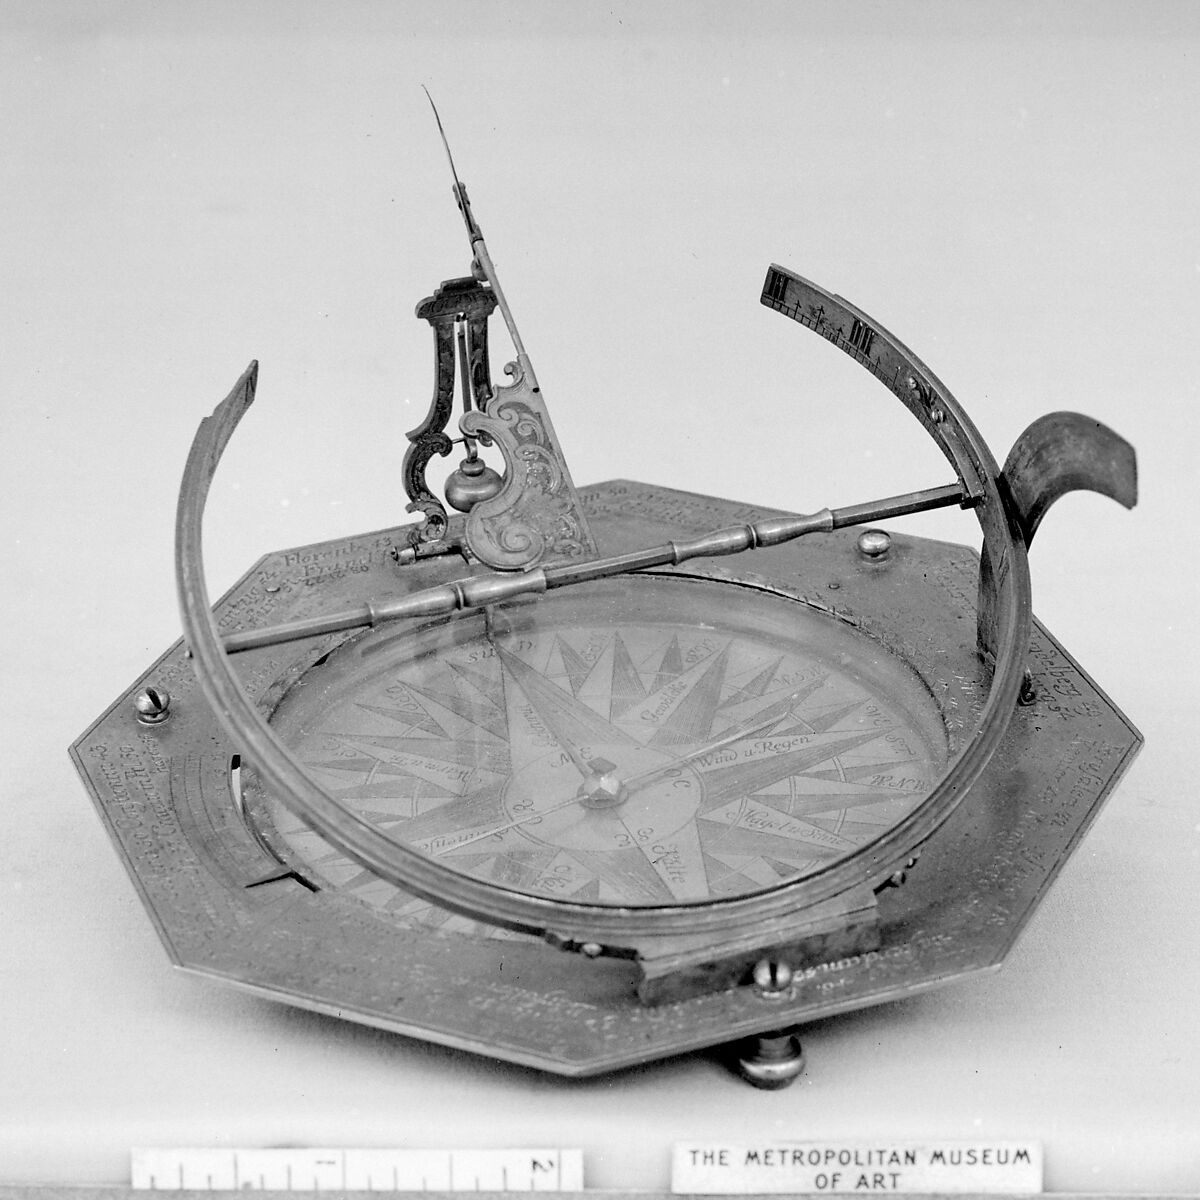 Portable equatorial sundial, Ludewig, Brass, water-gilded and silvered; silver, German, Dresden